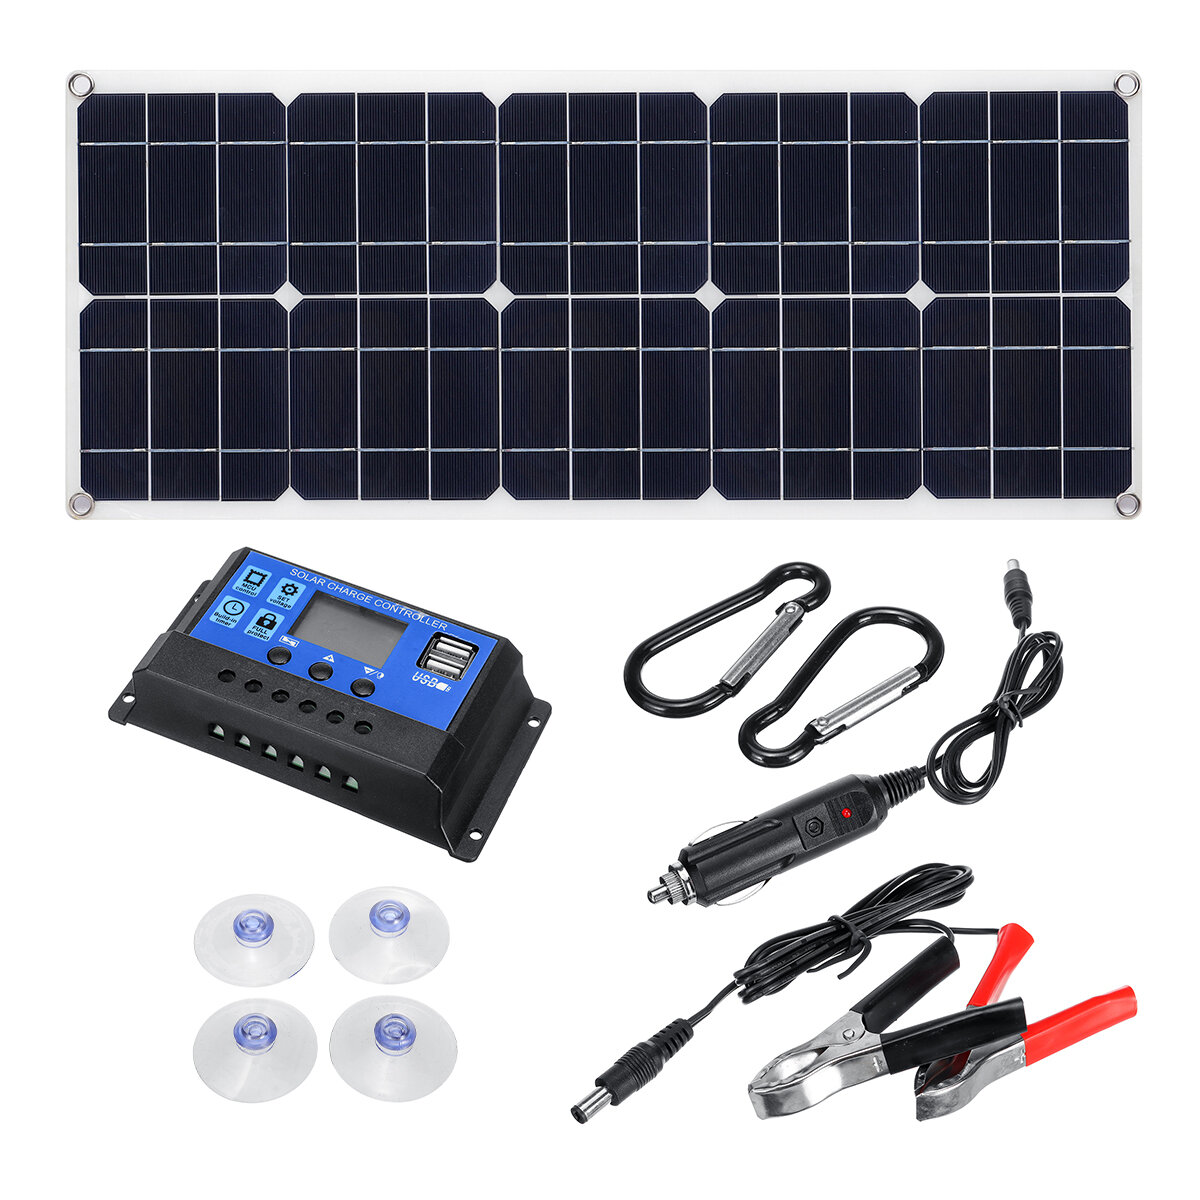 Image of 30W 18V MonocrystalineSolar Panel Dual 12V/5V DC USB Charger Kit with 10A Solar Controller & Cables